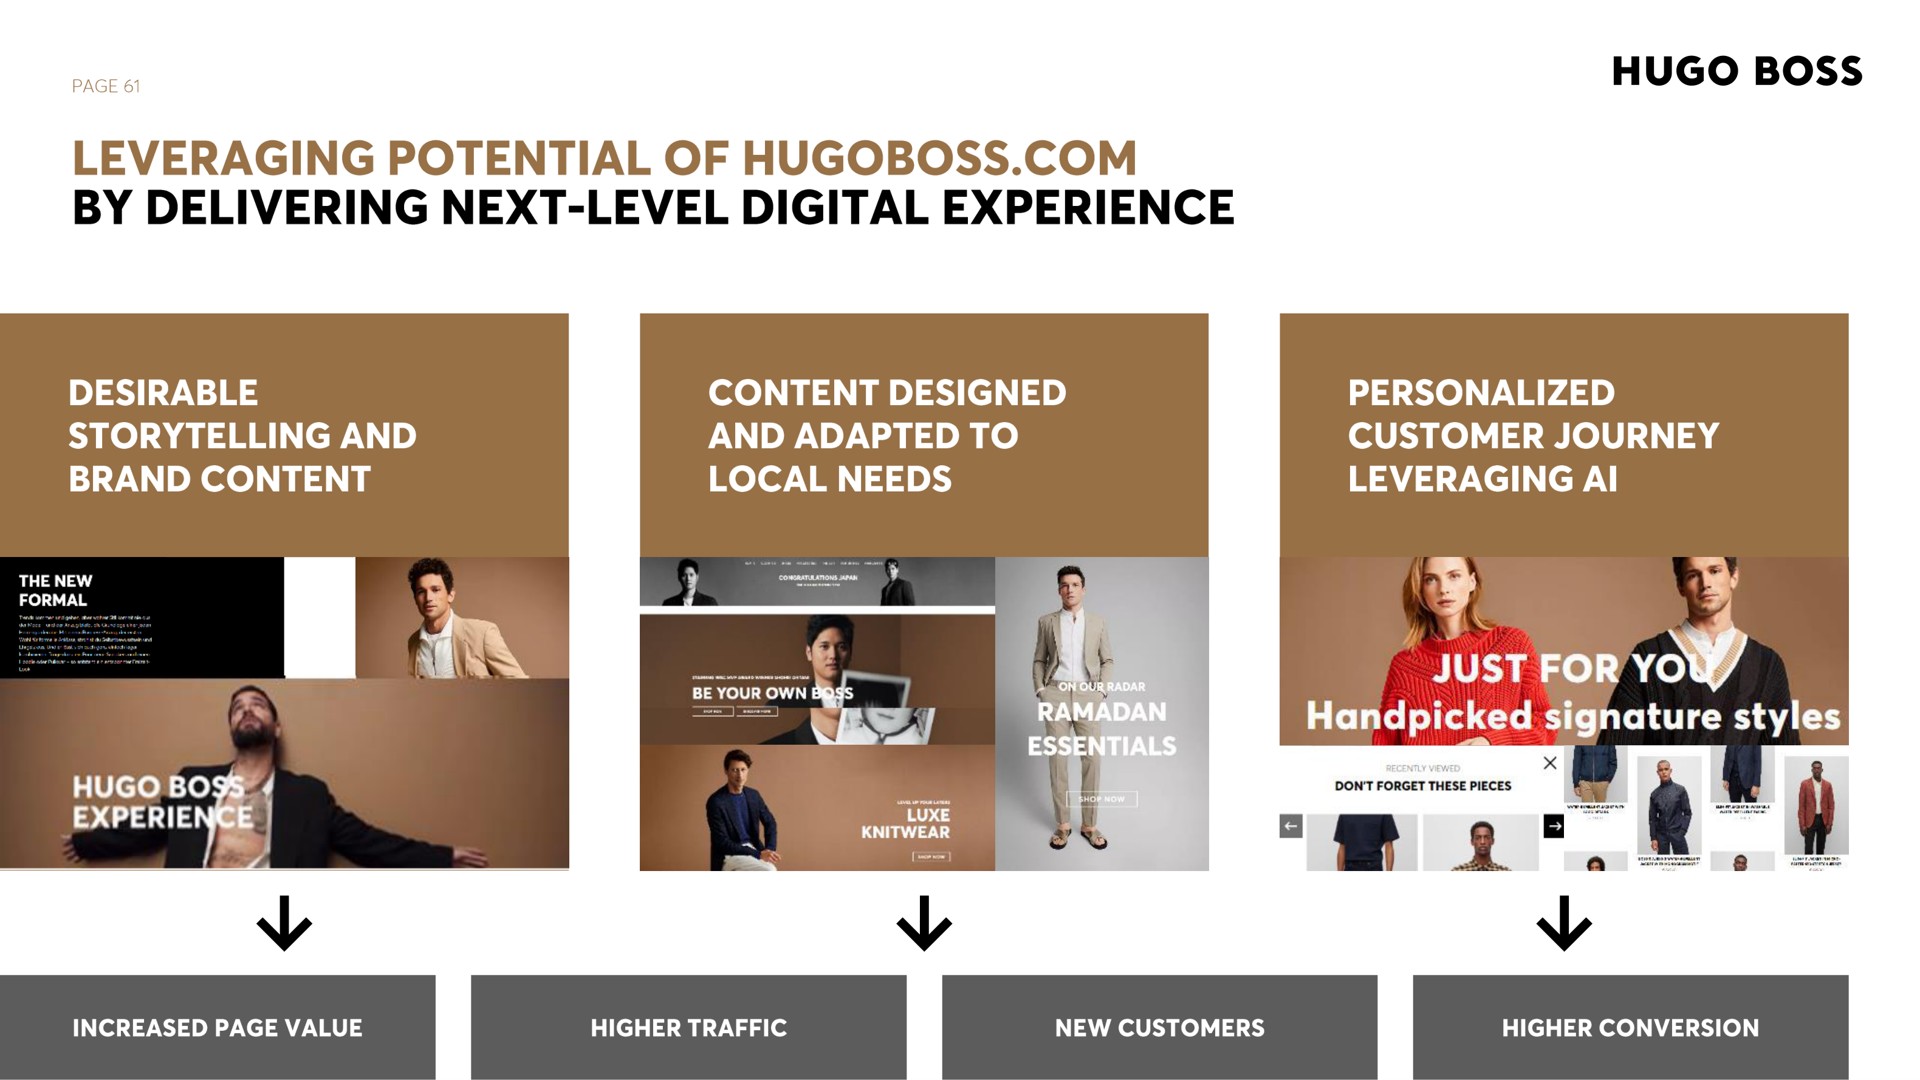 leveraging potential of by delivering next level digital experience boss desirable storytelling and brand content content designed and adapted to local needs personalized customer journey leveraging just for a signature styles | Hugo Boss